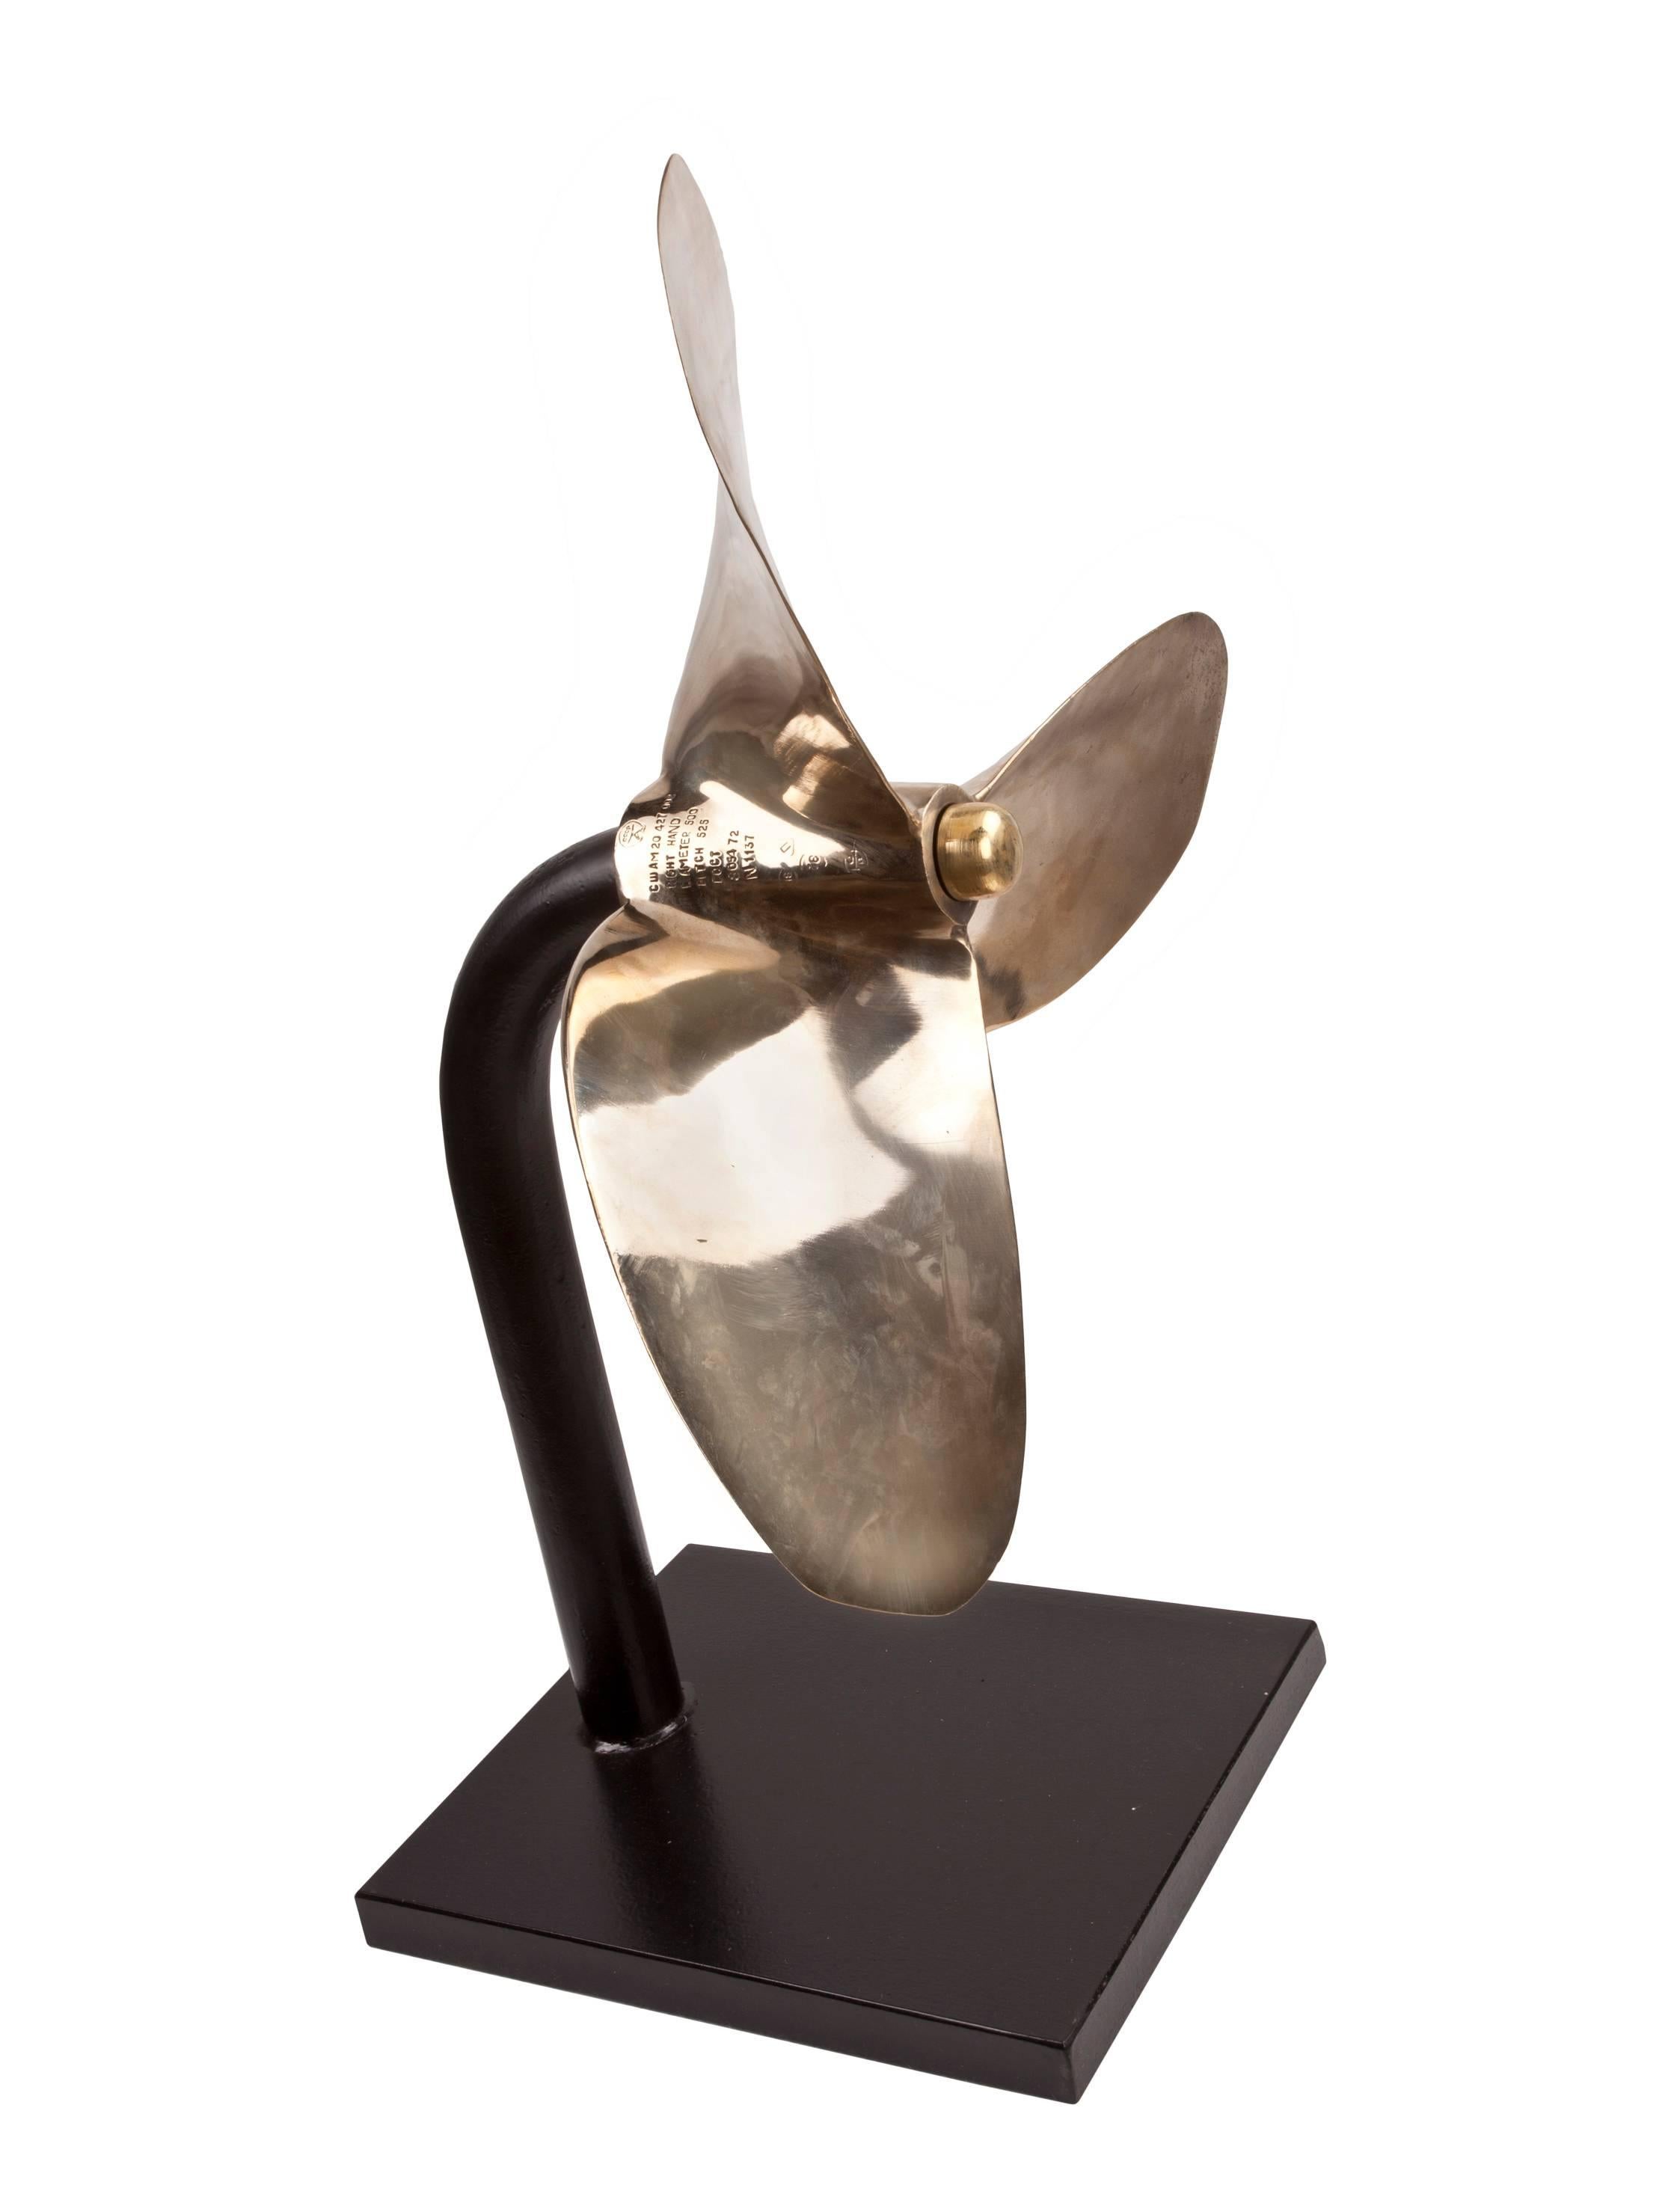 A recovered propeller from a ship's lifeboat (and not the rubber raft variety). Exceptional large size and makes a beautiful sculpture, circa 1970s. Industrial, soft and elegant all at once. Stand is custom-made and the prop can be taken off. The